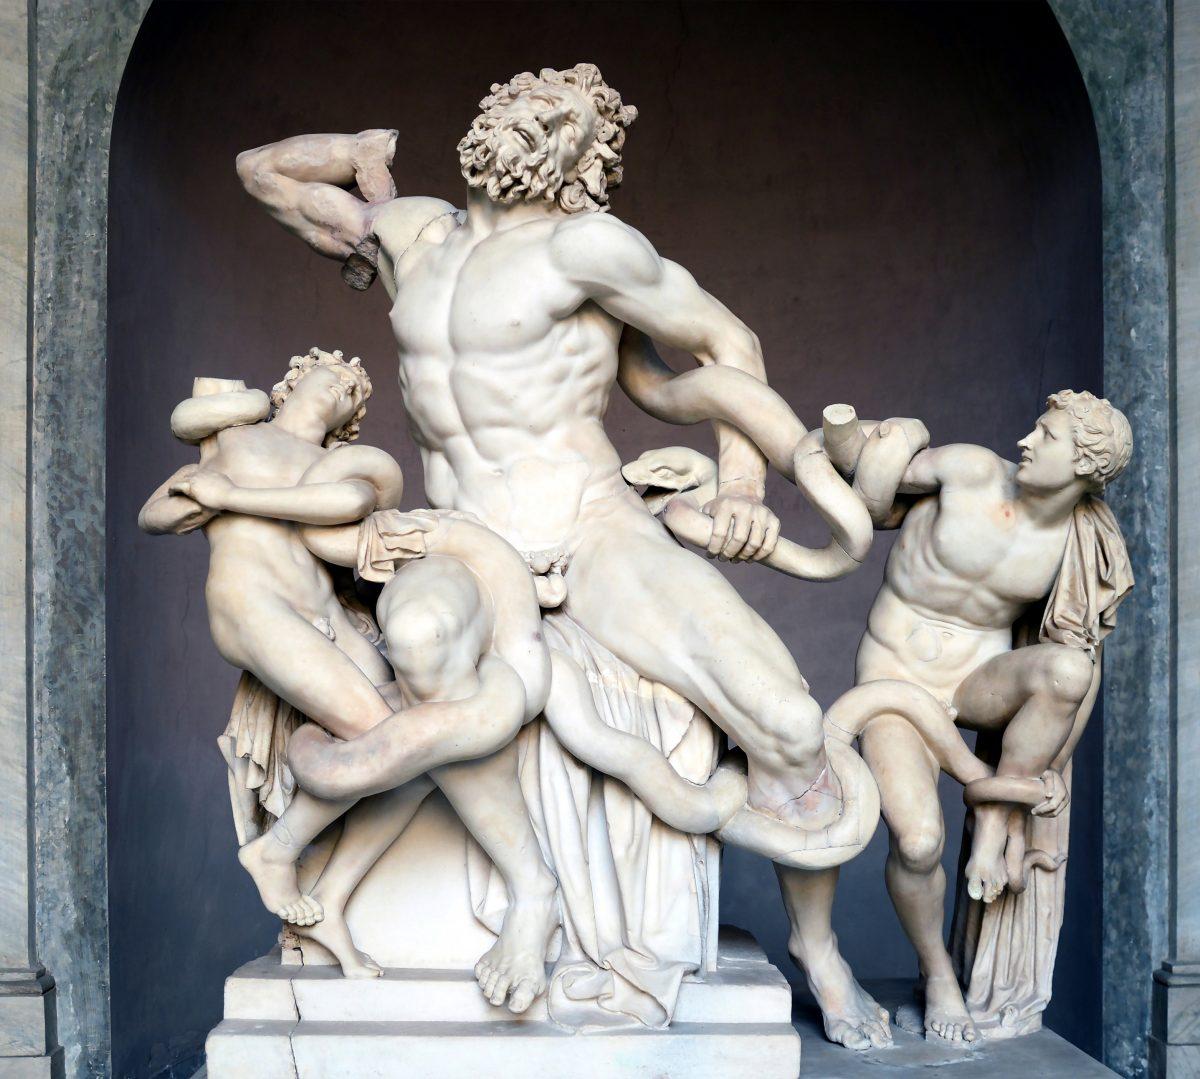 “Laocoön and His Sons,” 40–30 B.C., attributed by Pliny the Elder to Agesander, Athenodoros, and Polydorus. Marble, 6 feet 10 inches high by 5 feet 4 inches wide by 3 feet 8 inches deep. Vatican Museum, Italy. (CC BY-SA 4.0)